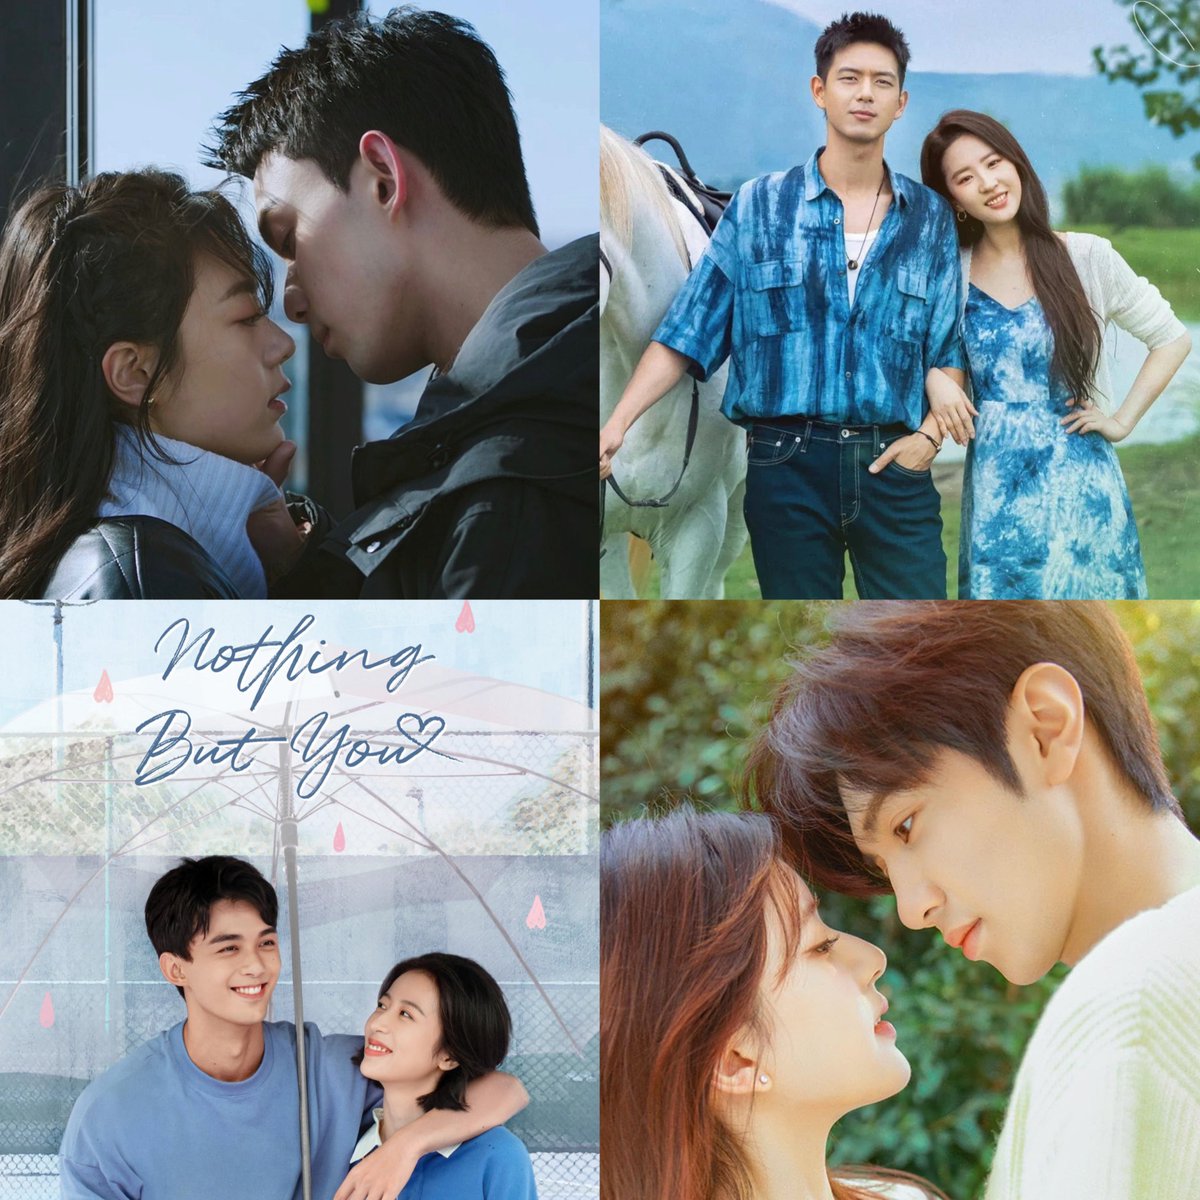 In the last 1 year, I’ve been dragged into Cdrama and wacth so manyyyy dramas that often showing up in the recommendation but for my personal preference these are my top favourite:

🥇 #AmidstASnowstormofLove 
🥈#MeetYourSelf 
🥉#NothingButYou
🎖️4️⃣ #HiddenLove